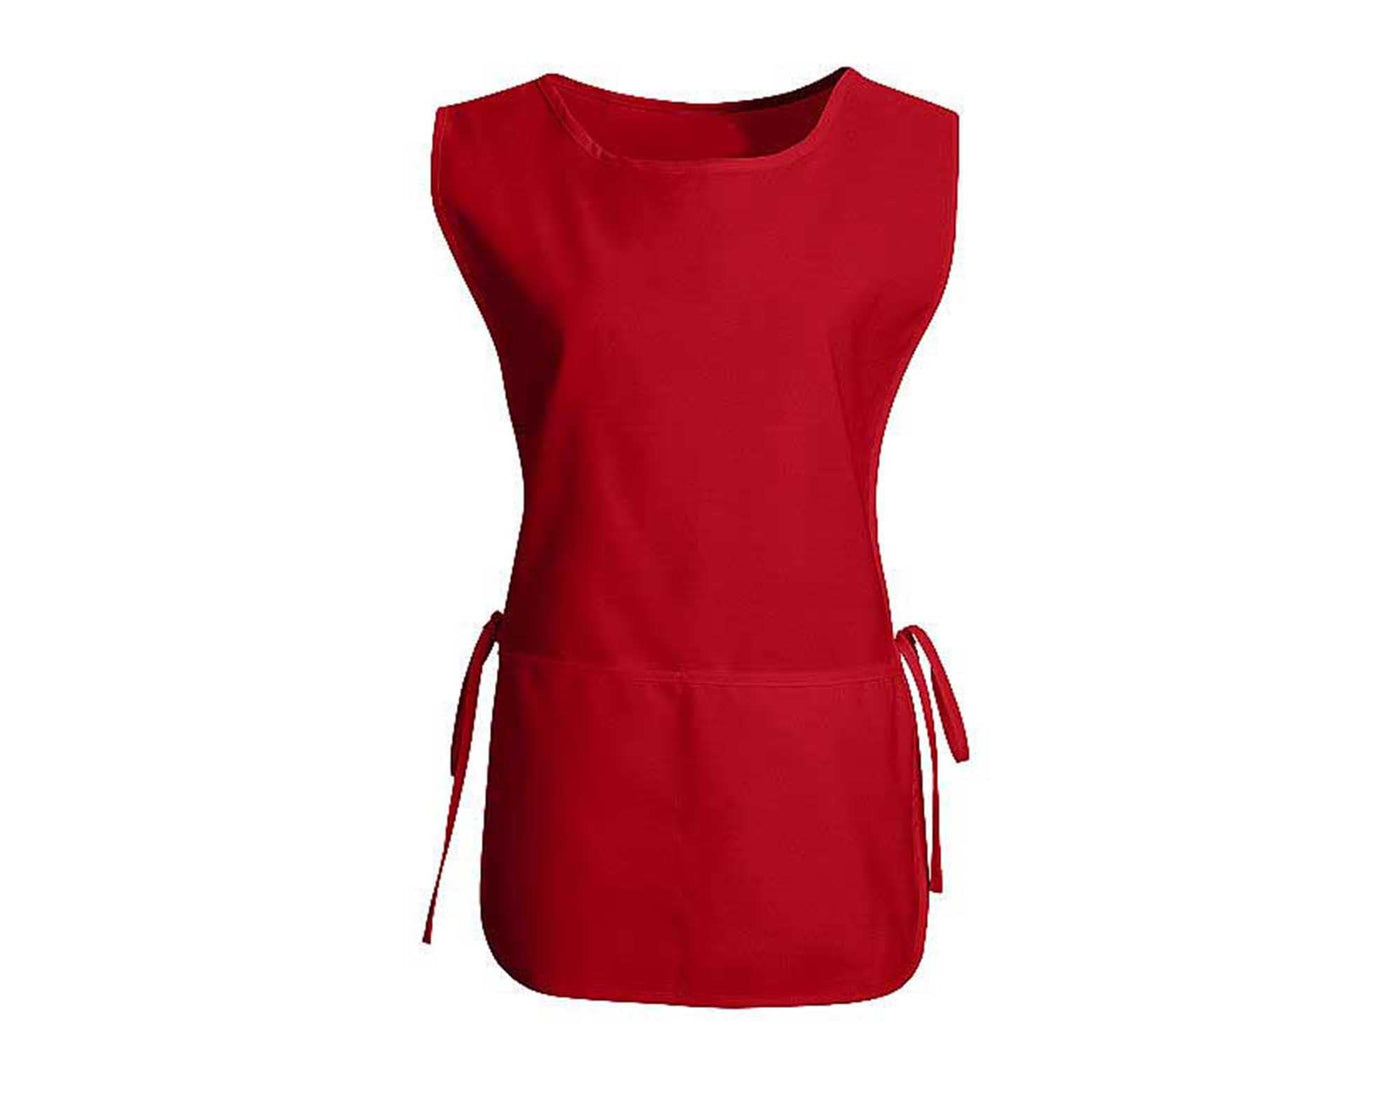 red cobbler apron with pocket and straps on the side